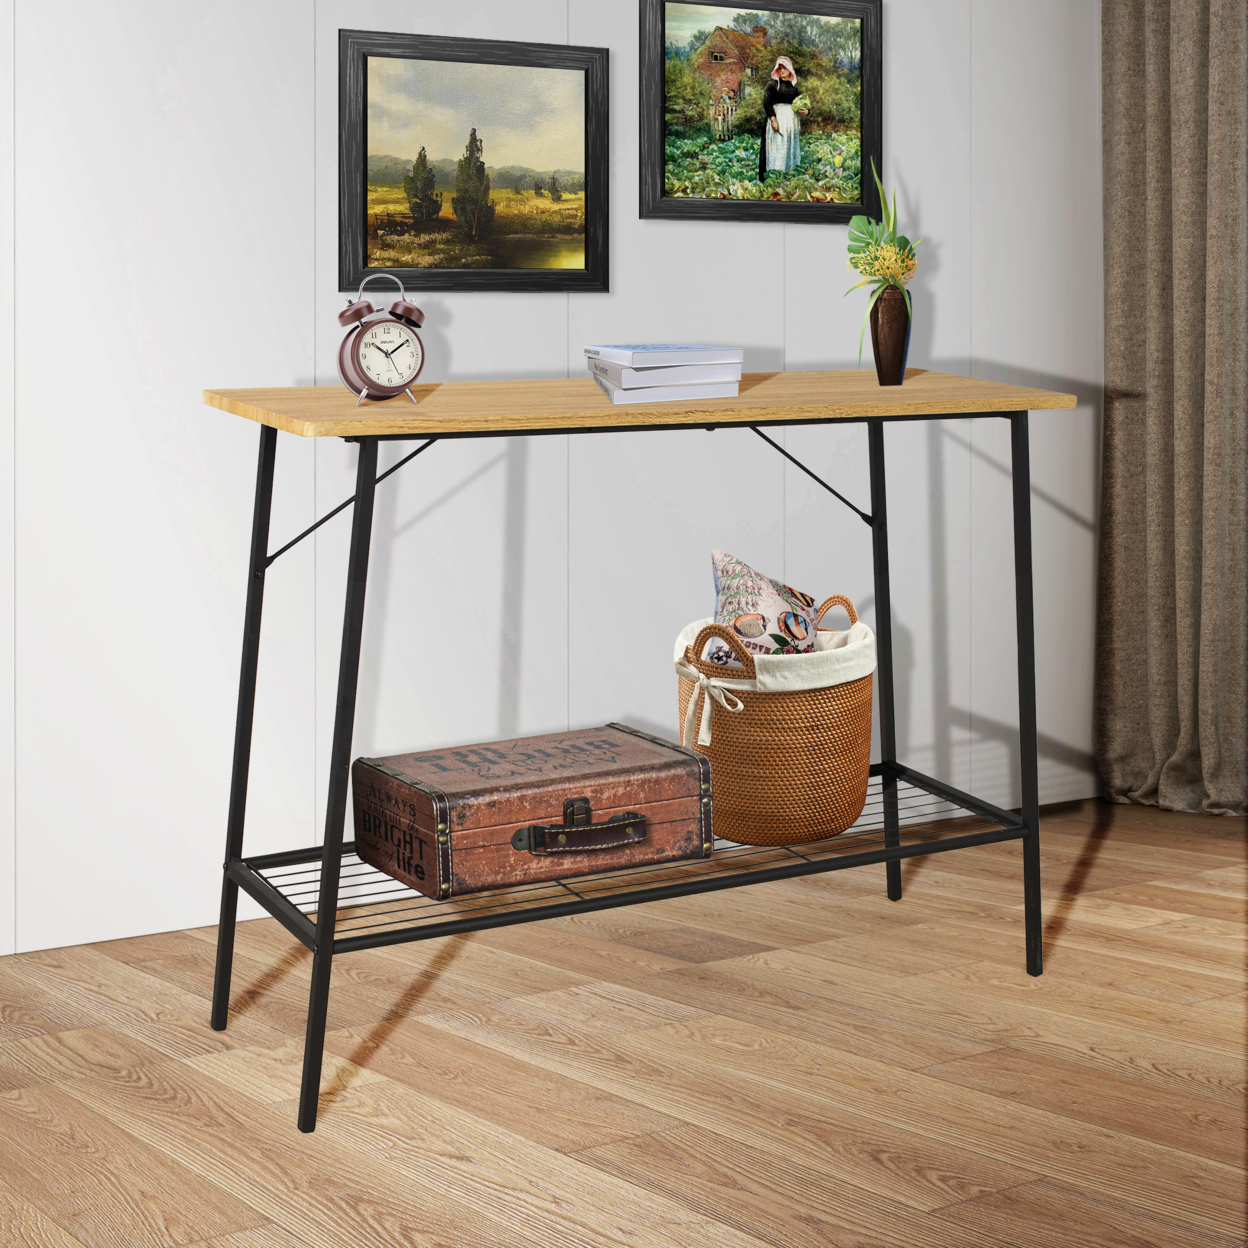 Wooden Console Sofa Table 39.5'', Entryway Table with 2-Tier Storage Shelves for Living Room, Bedroom, Balcony and Hallway